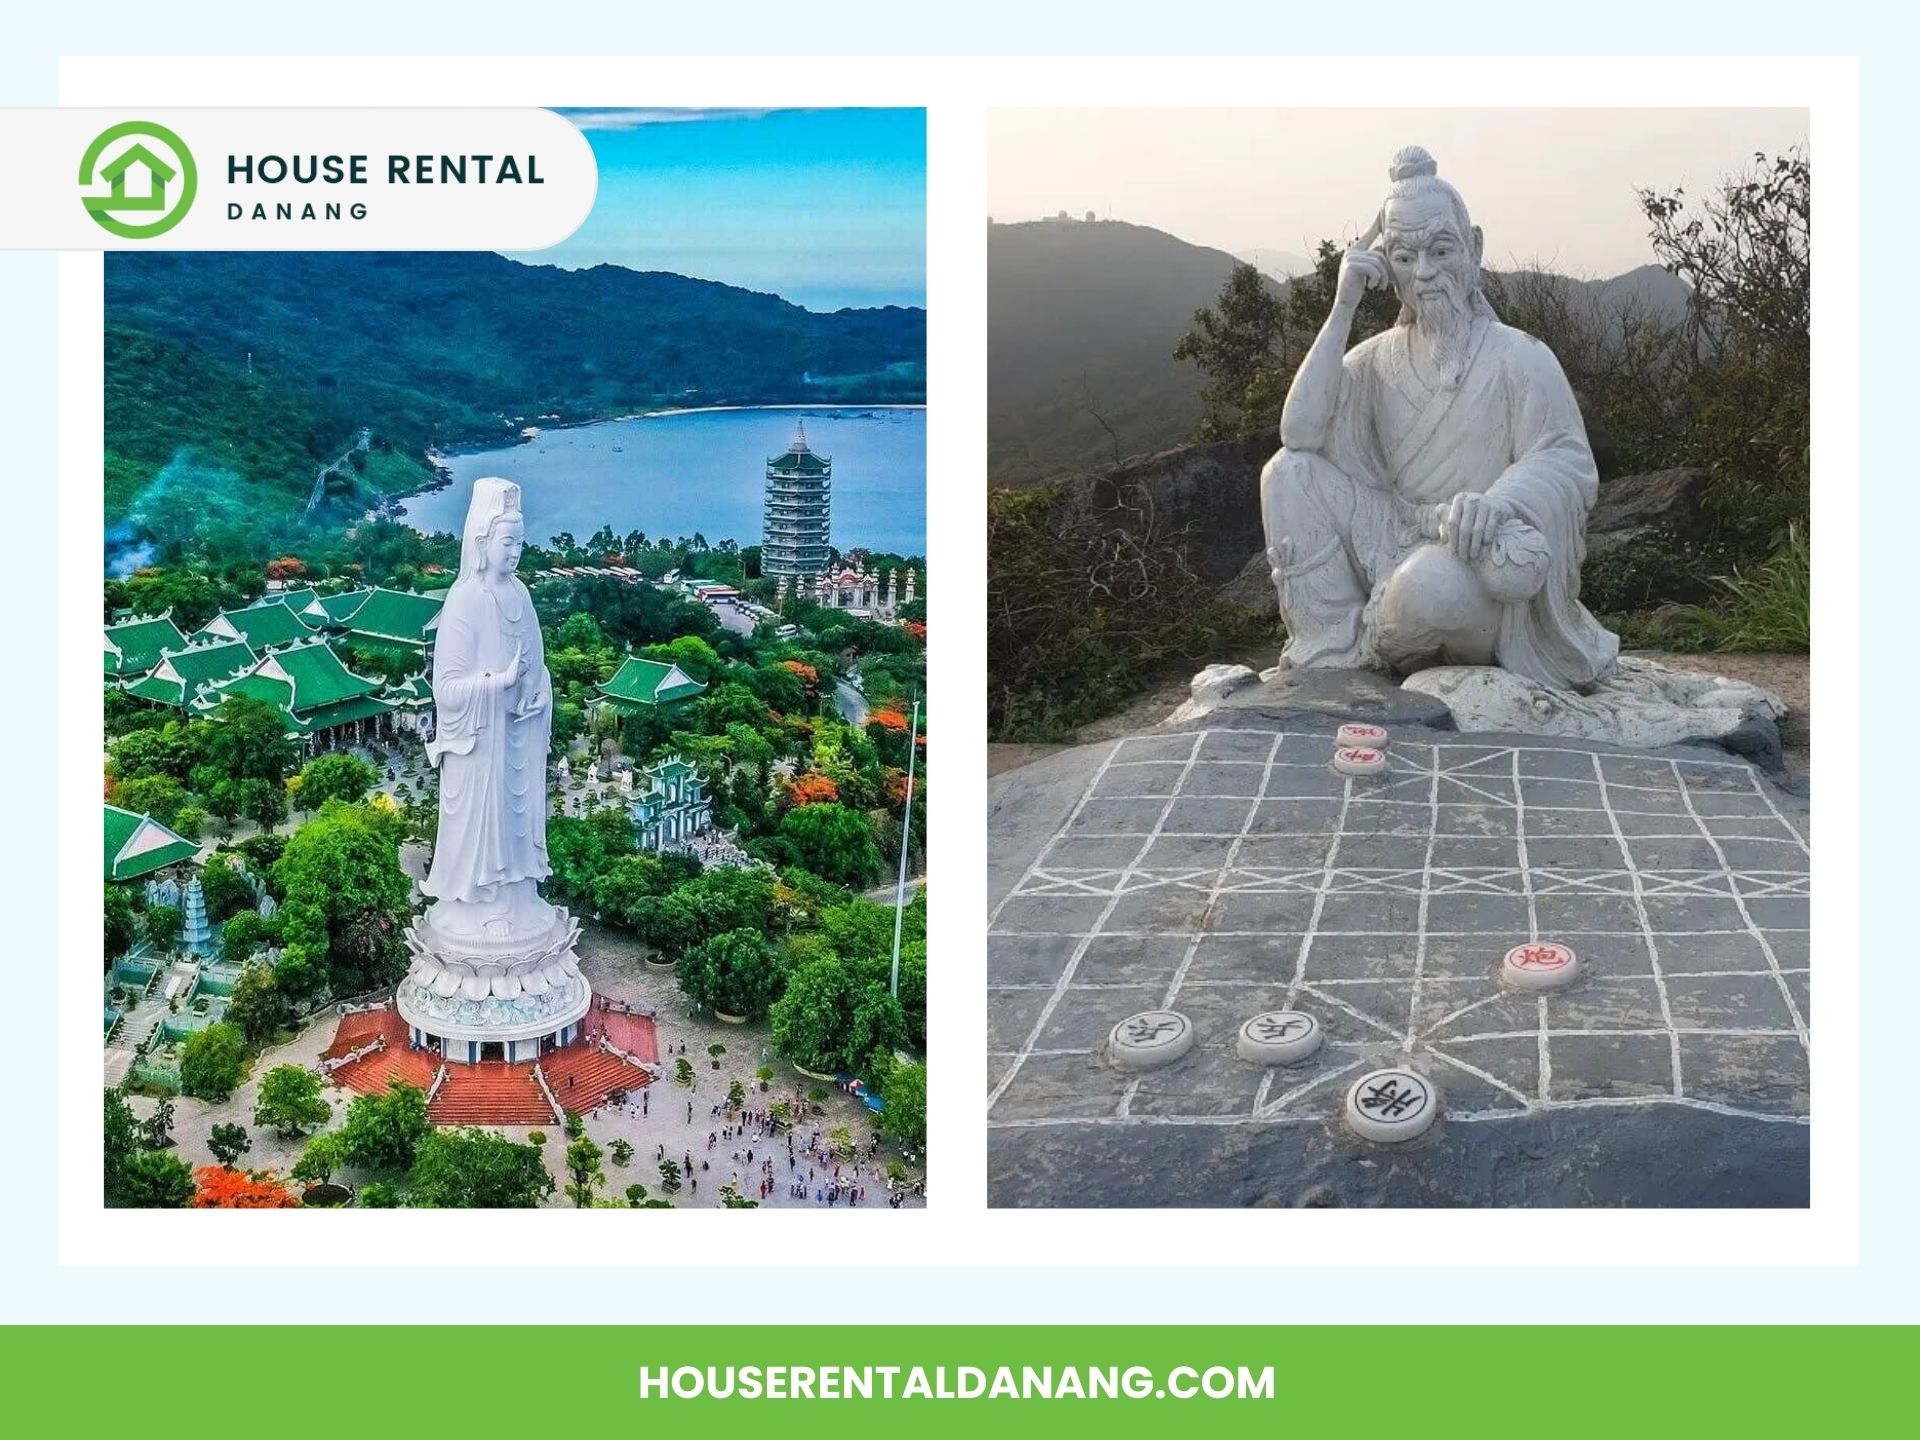 Aerial view of a large statue in a coastal area with surrounding buildings (left). Stone statue of an elderly man playing a board game (right). House Rental Danang company details included in the image. One of the Best Places to Visit in Da nang.